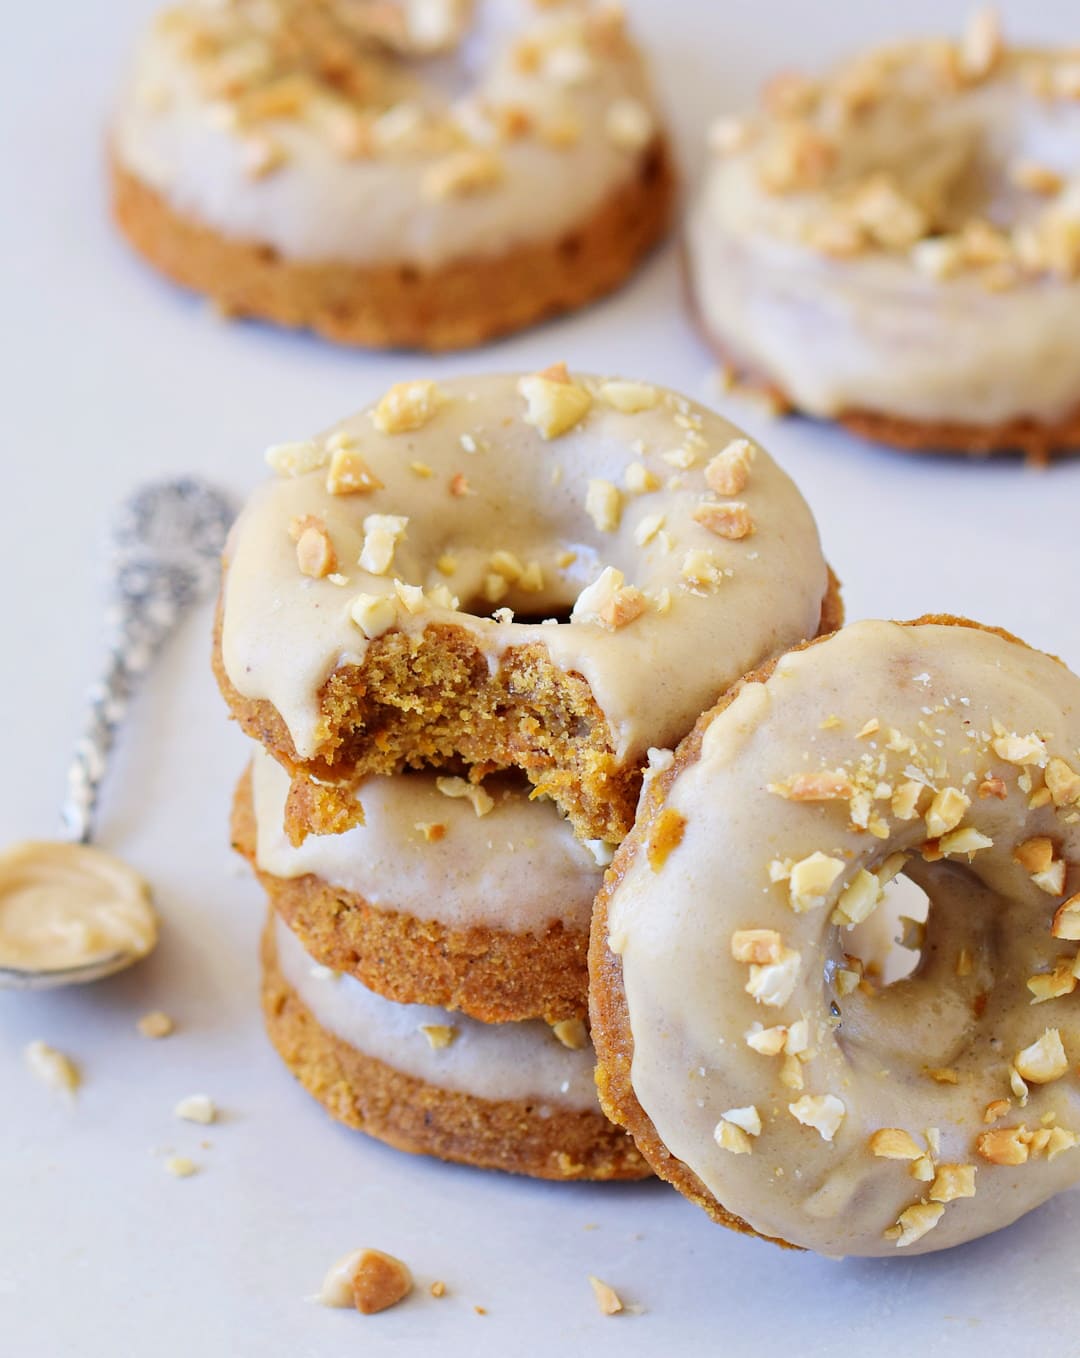 vegan carrot cake donuts with gingerbread flavor and frosting